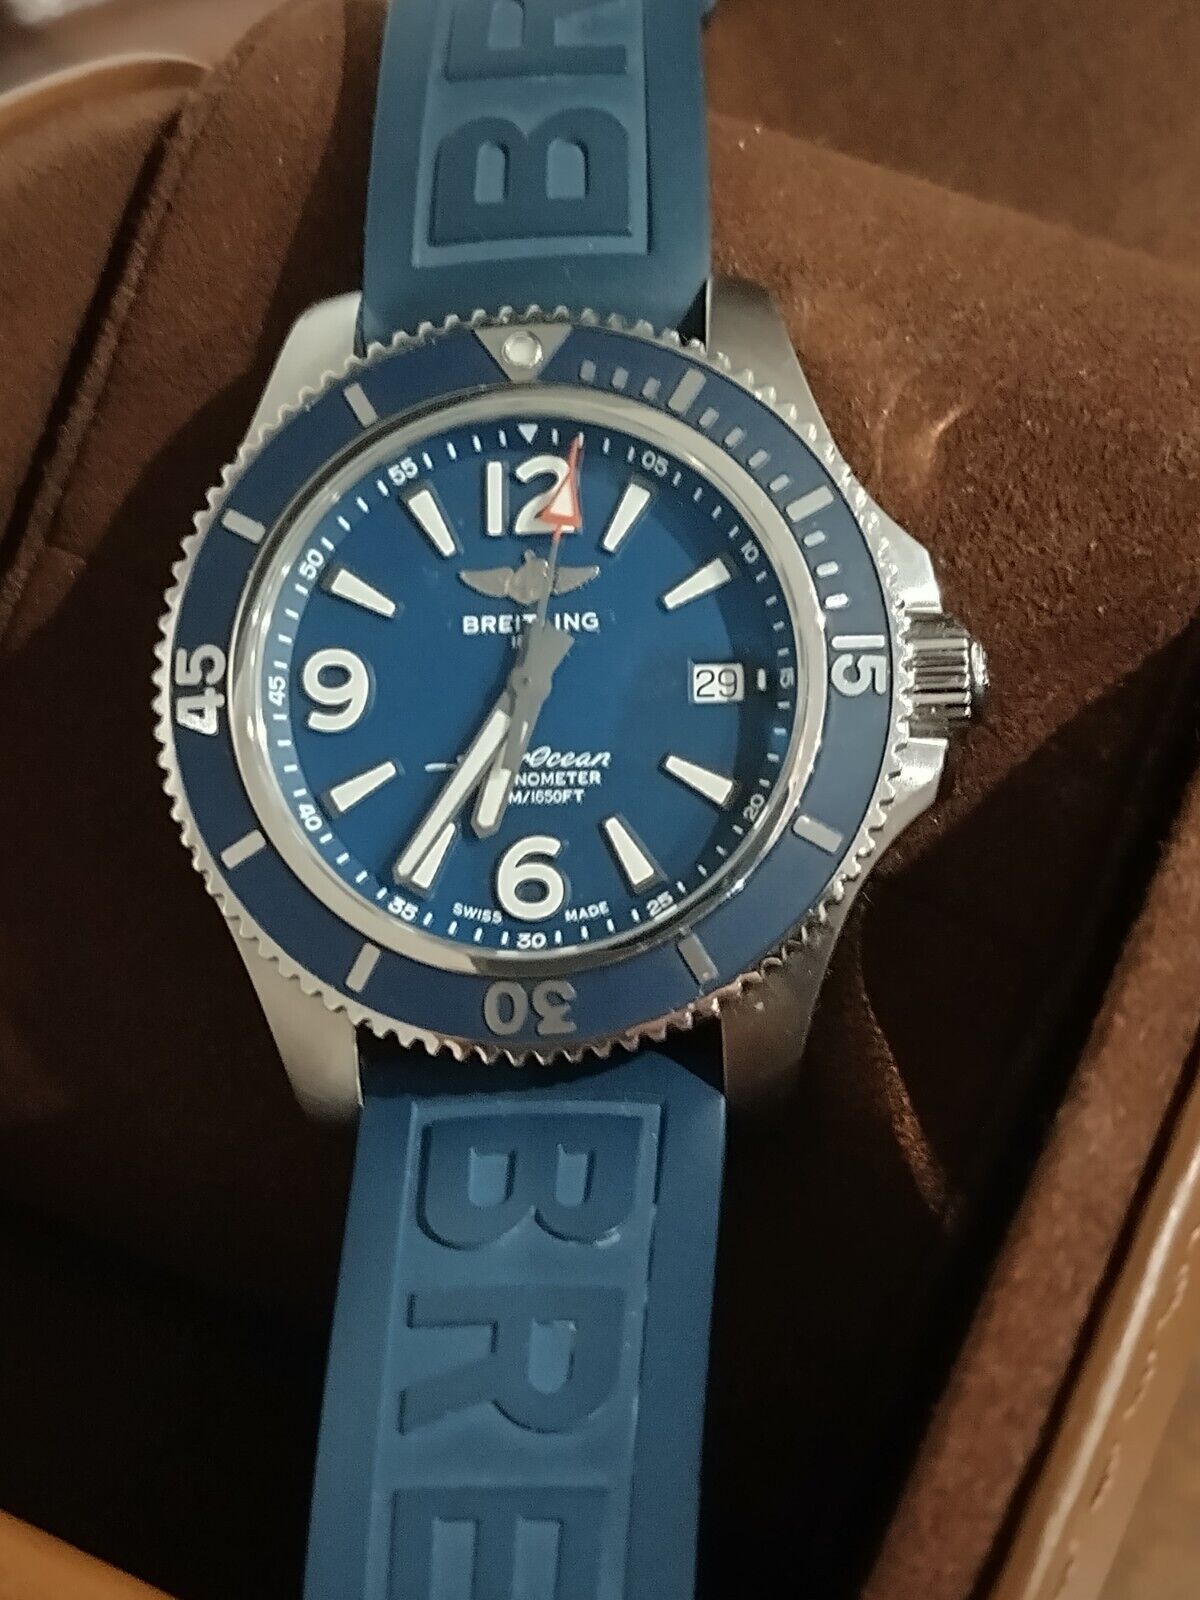 Breitling Superocean II AUTOMATIC 42 MM steel Diver Watch a17366d81c1s1...